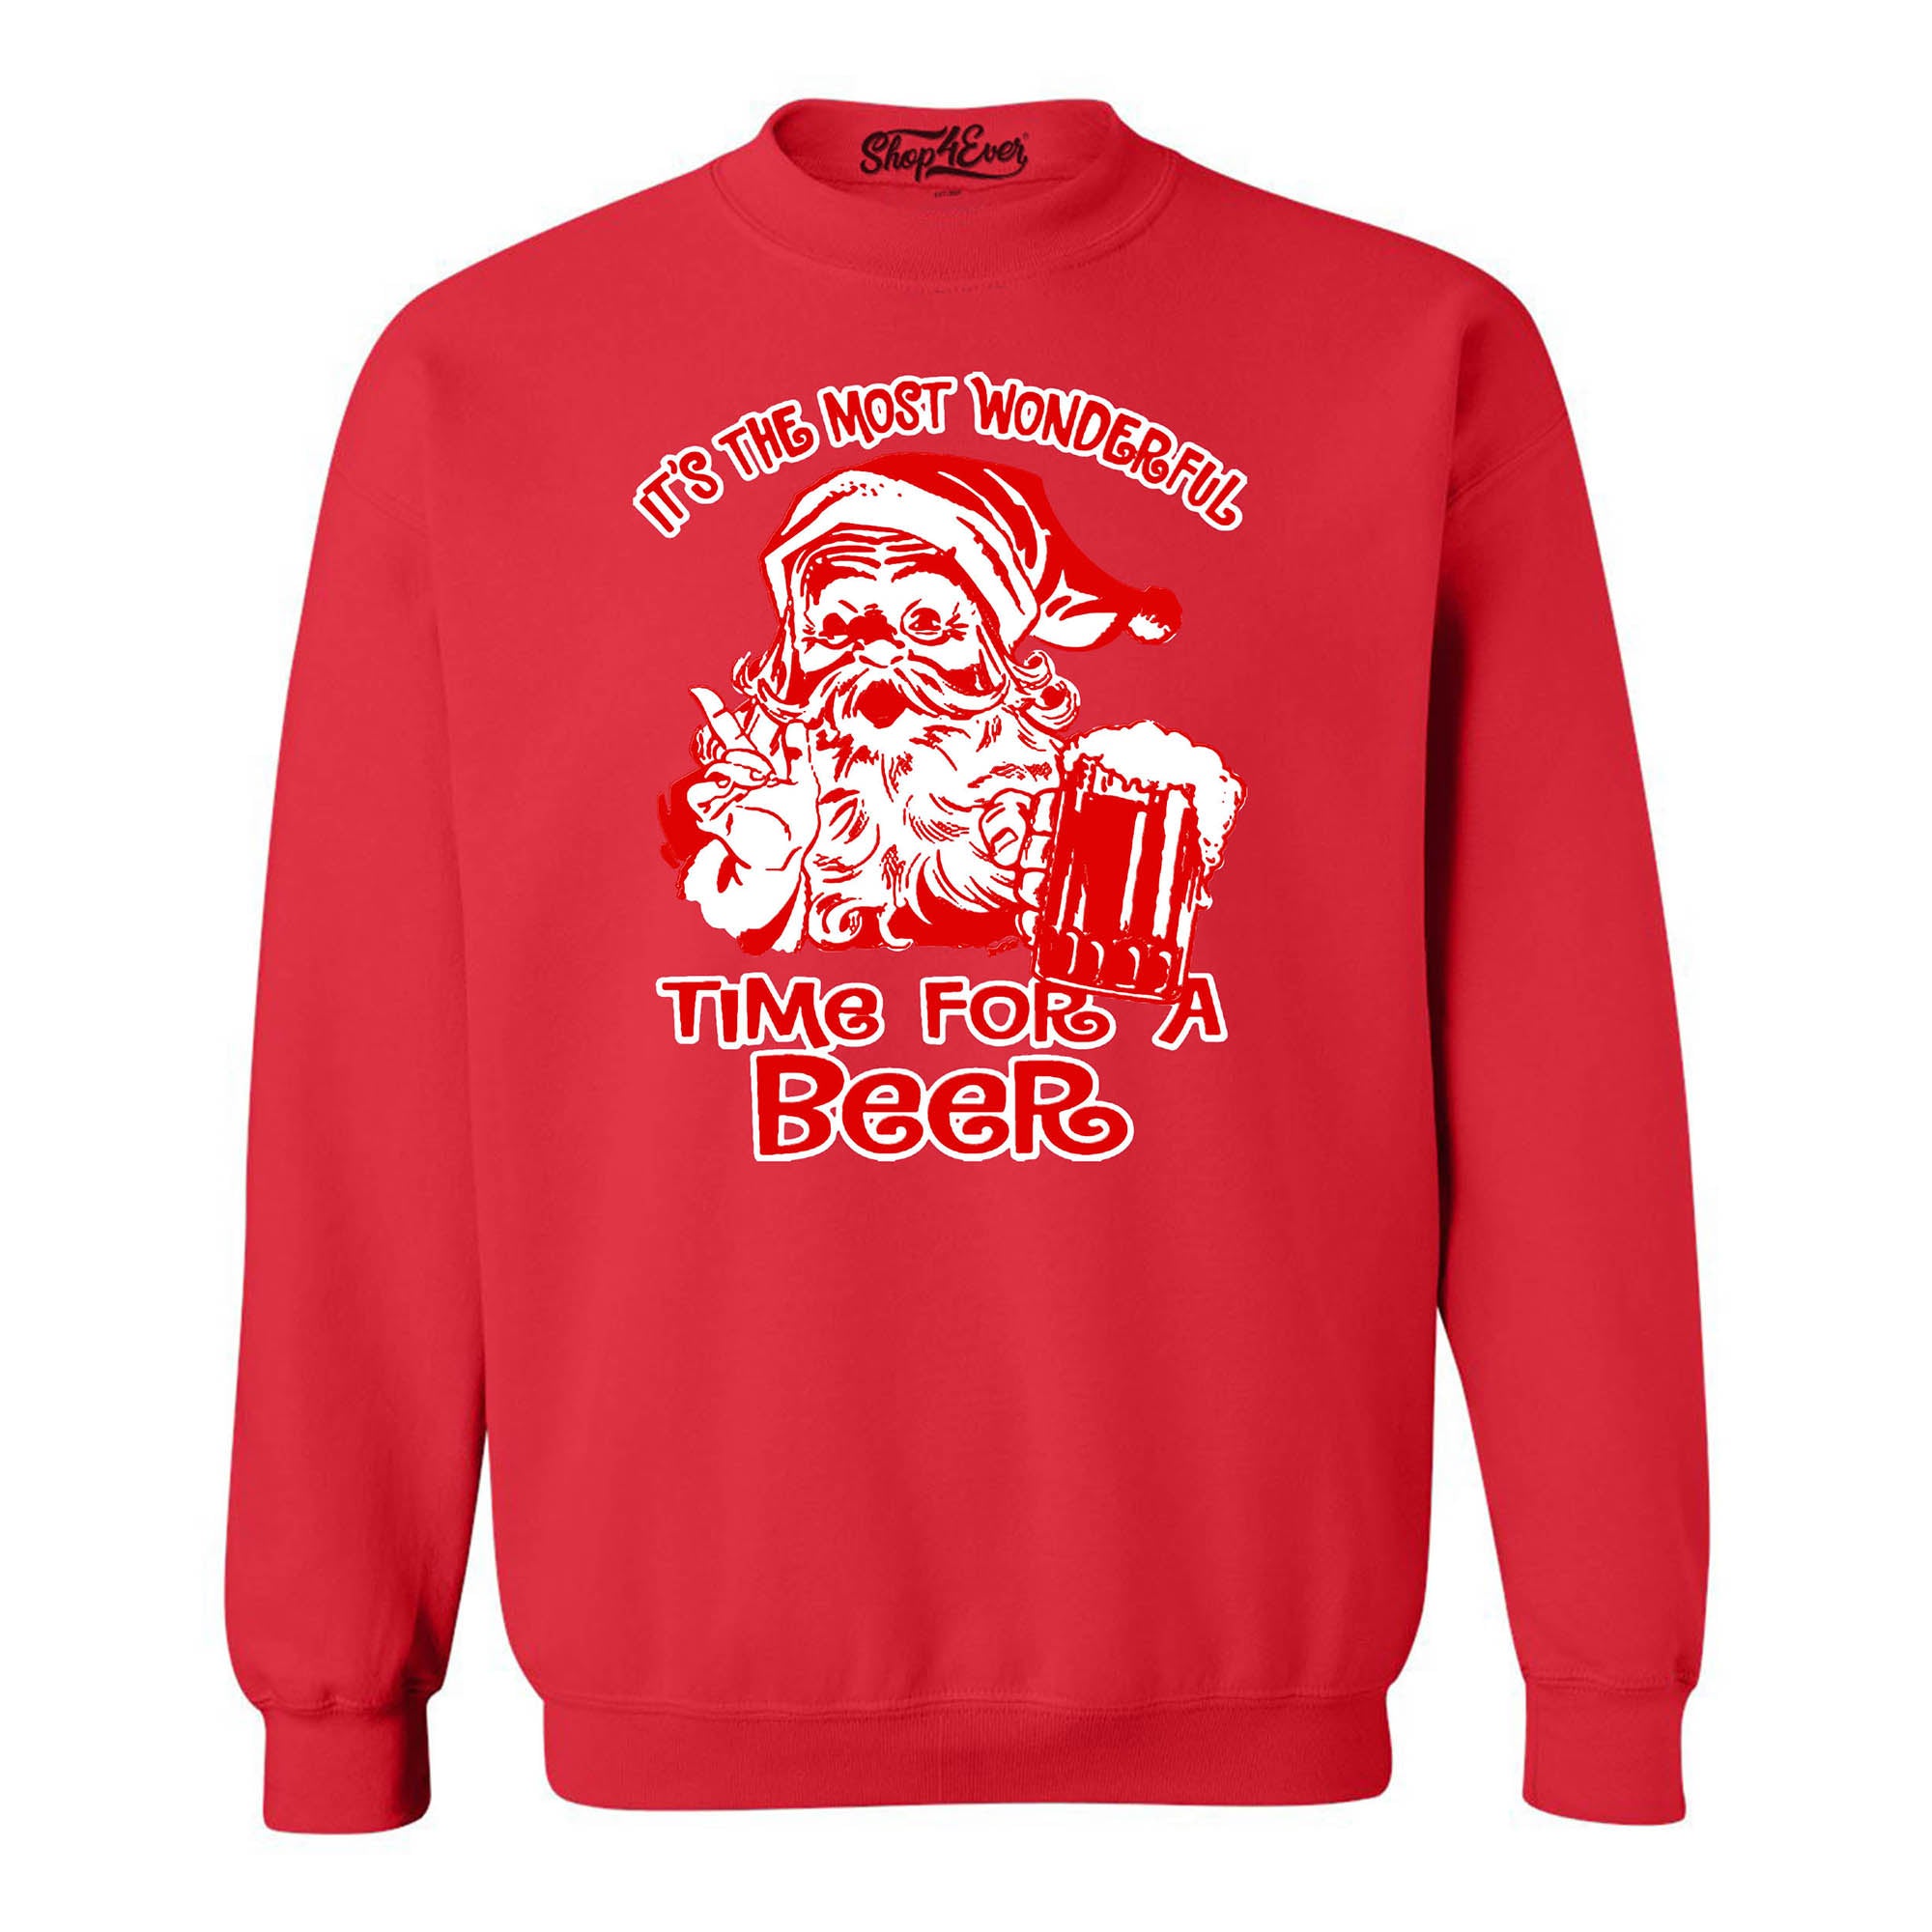 It's The Most Wonderful Time for a Beer Crewnecks Christmas Sweatshirts